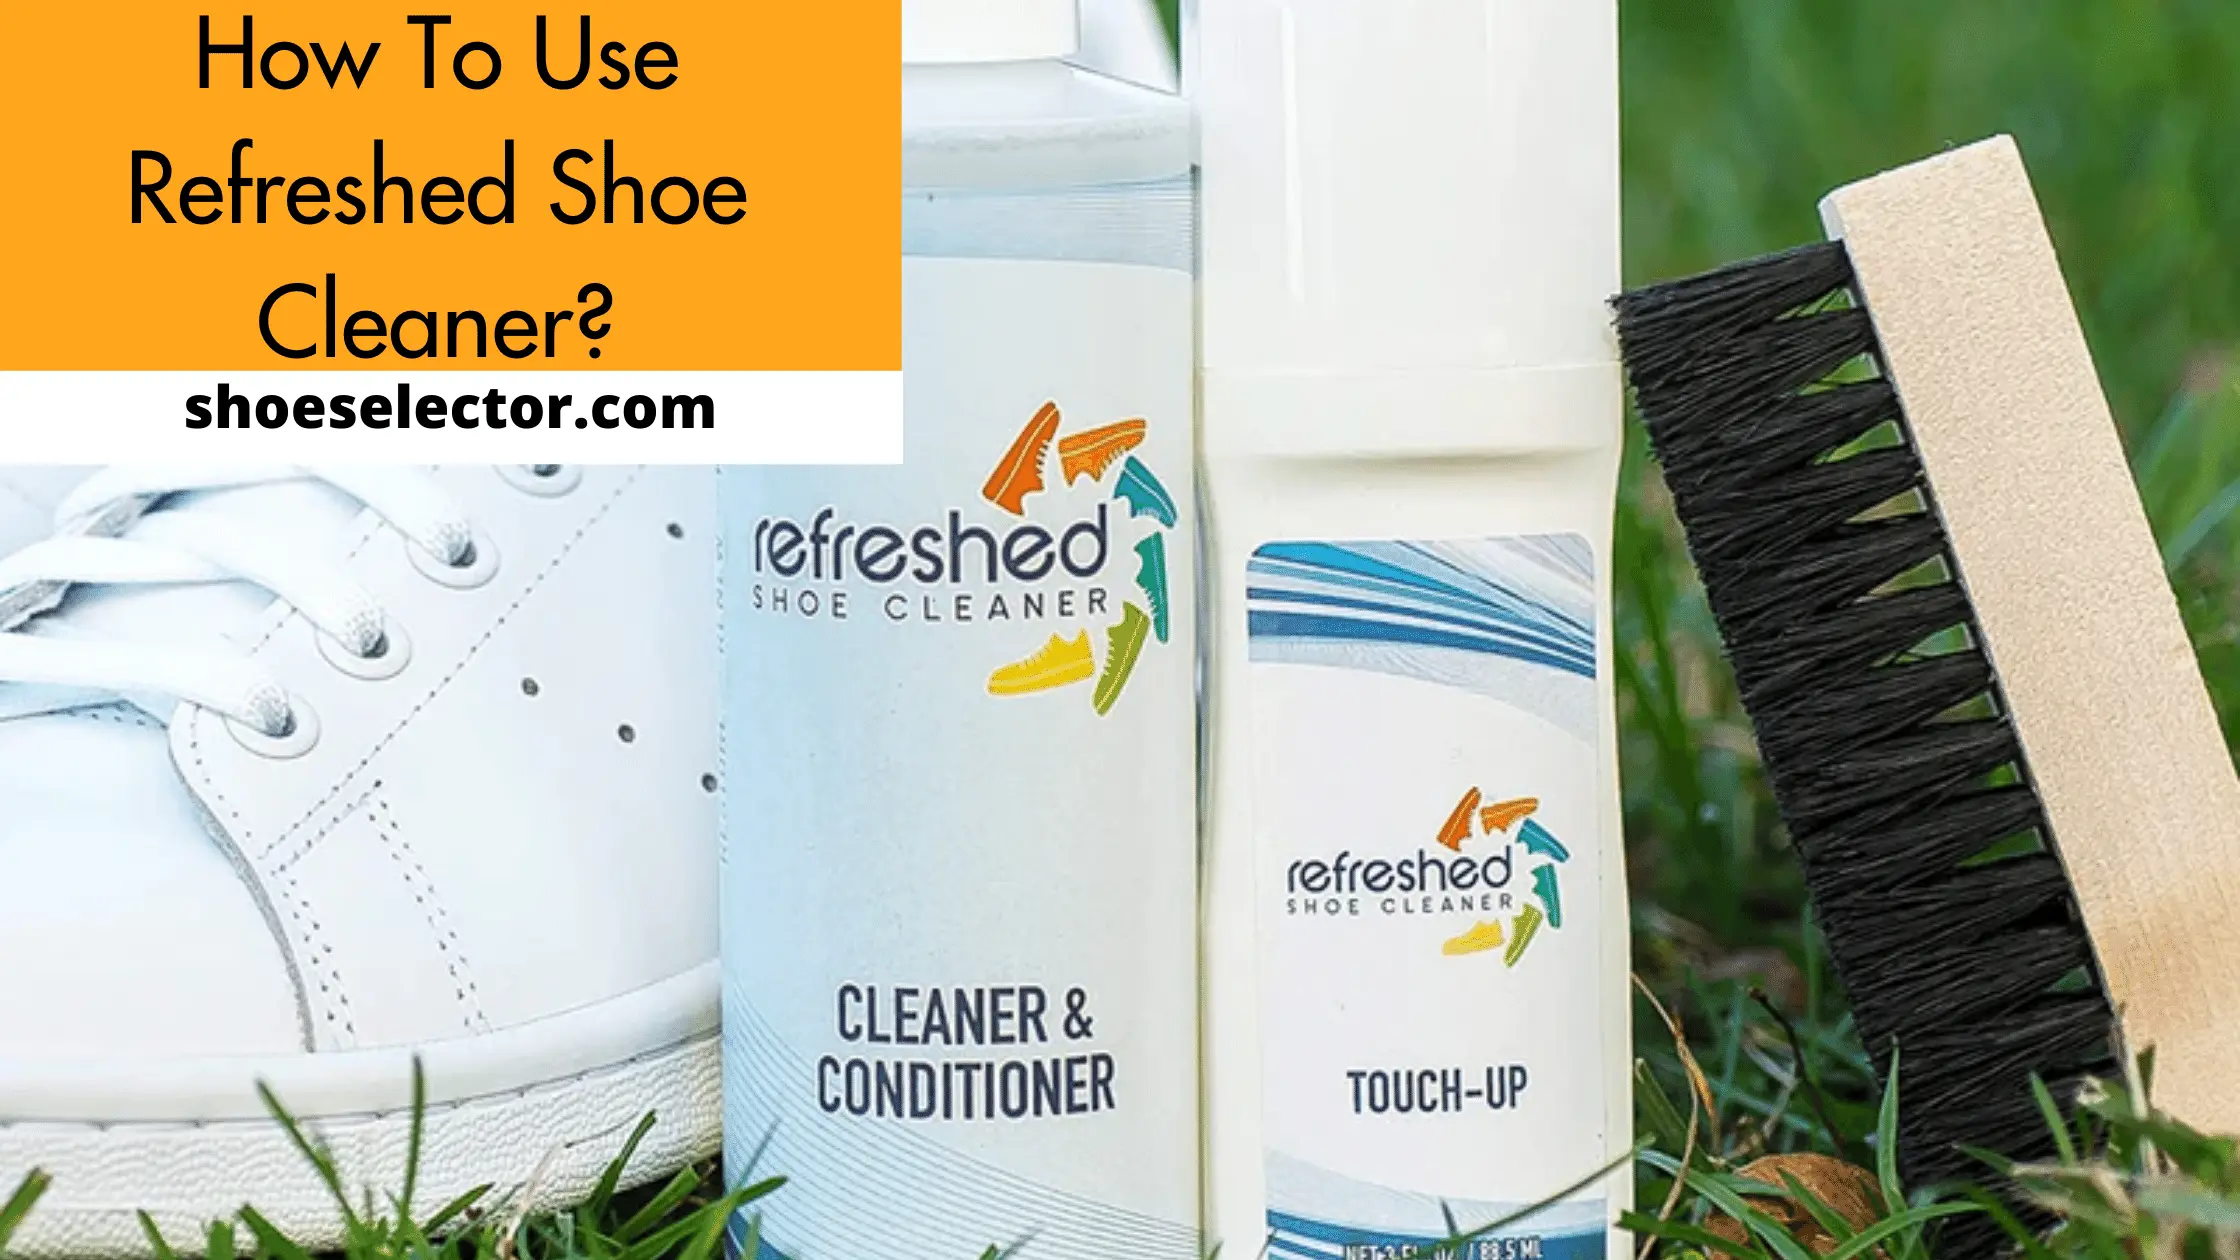 How to Use Refreshed Shoe Cleaner? - Solution Guide